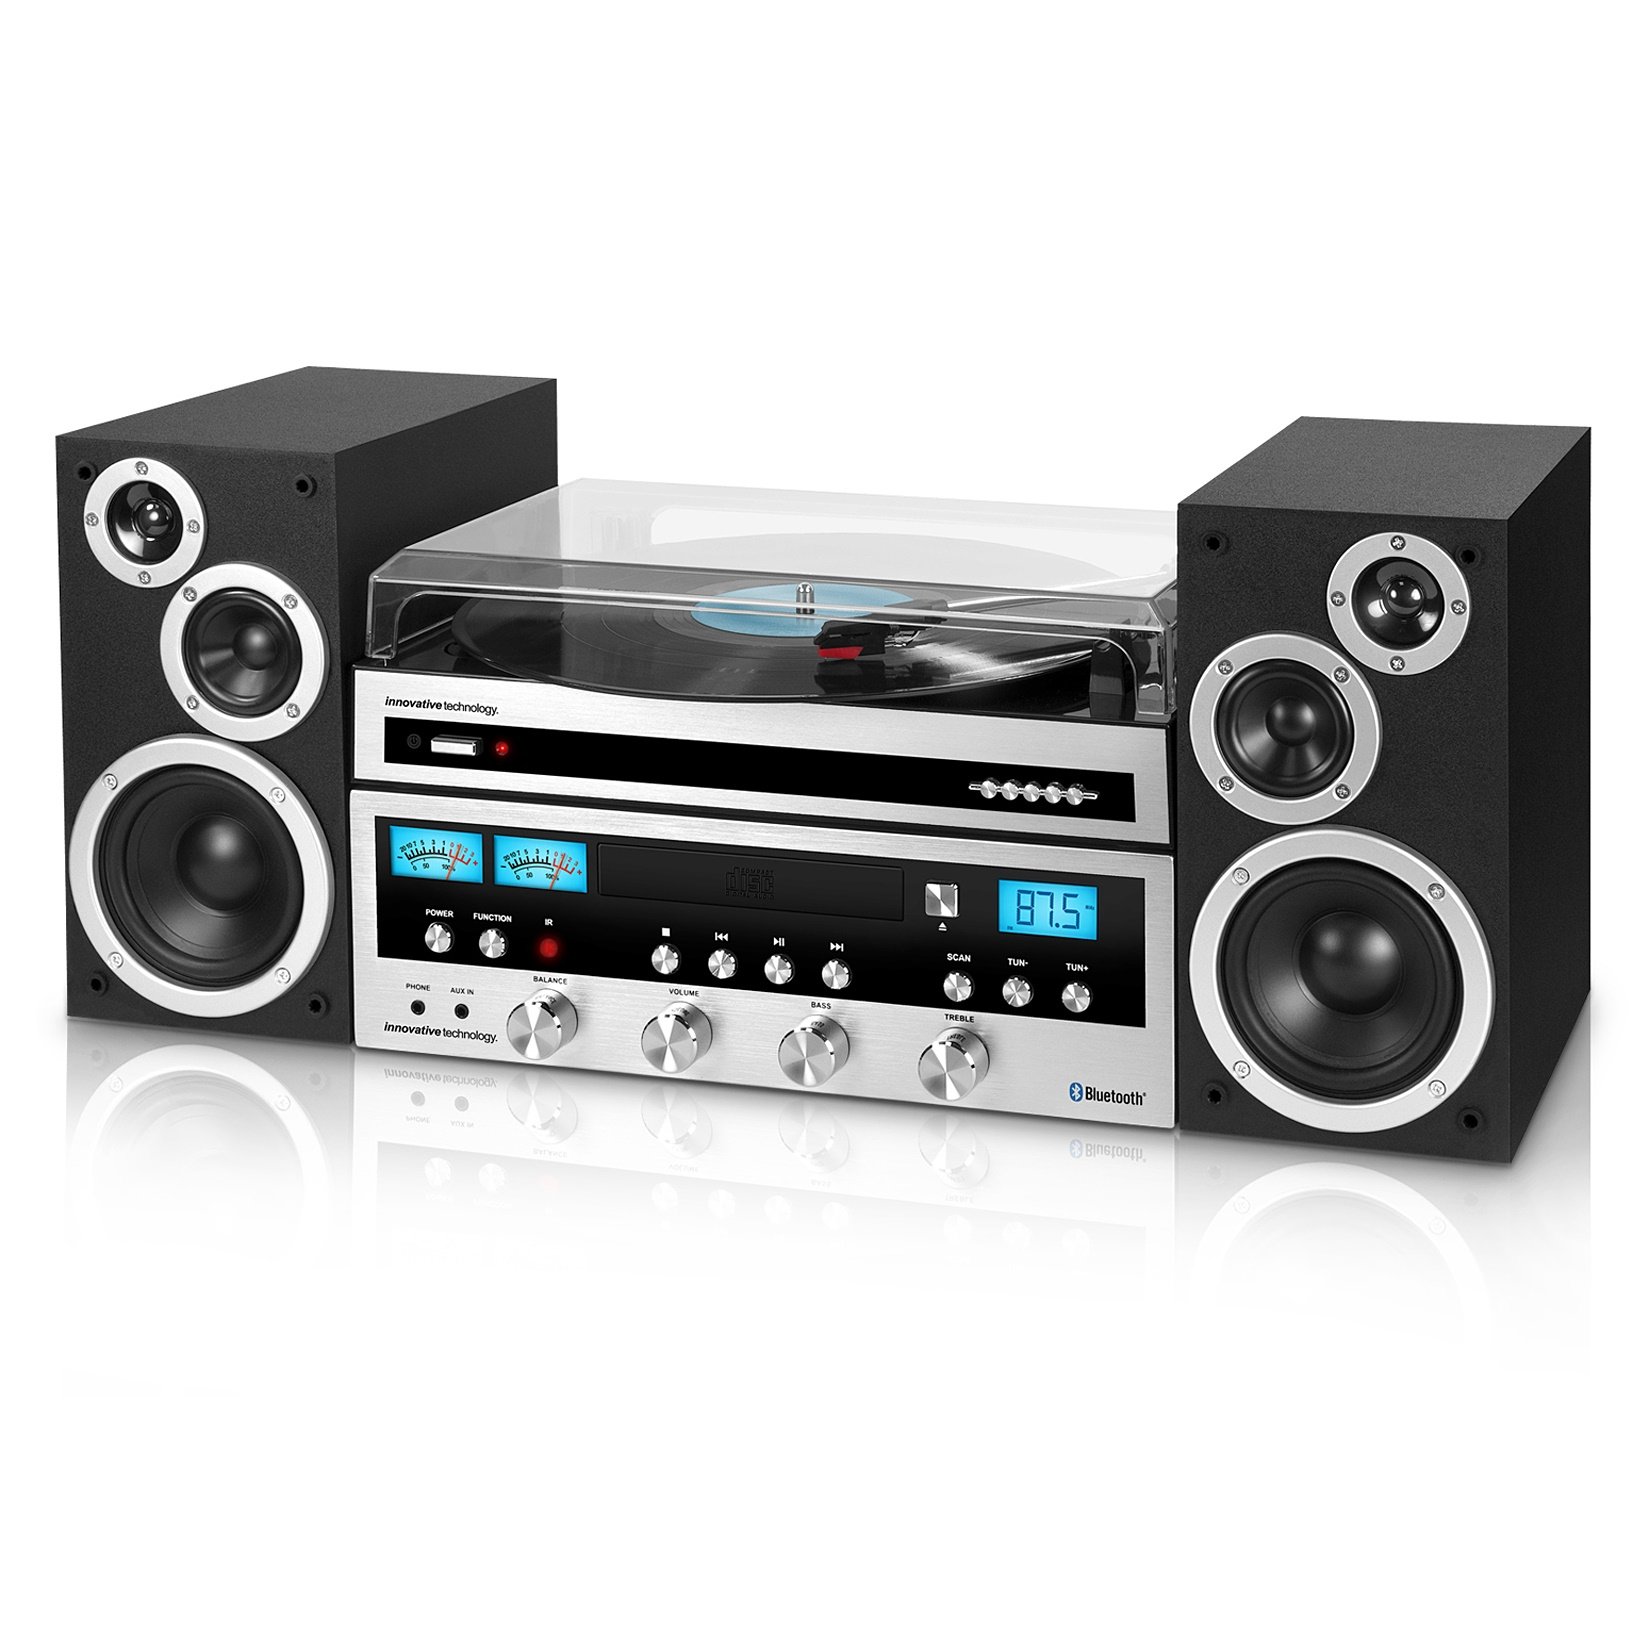 Innovative Technology Classic Retro Bluetooth Stereo System with CD Player, FM Radio, Aux-In, Headphone Jack, and Turntable, Silver and Black